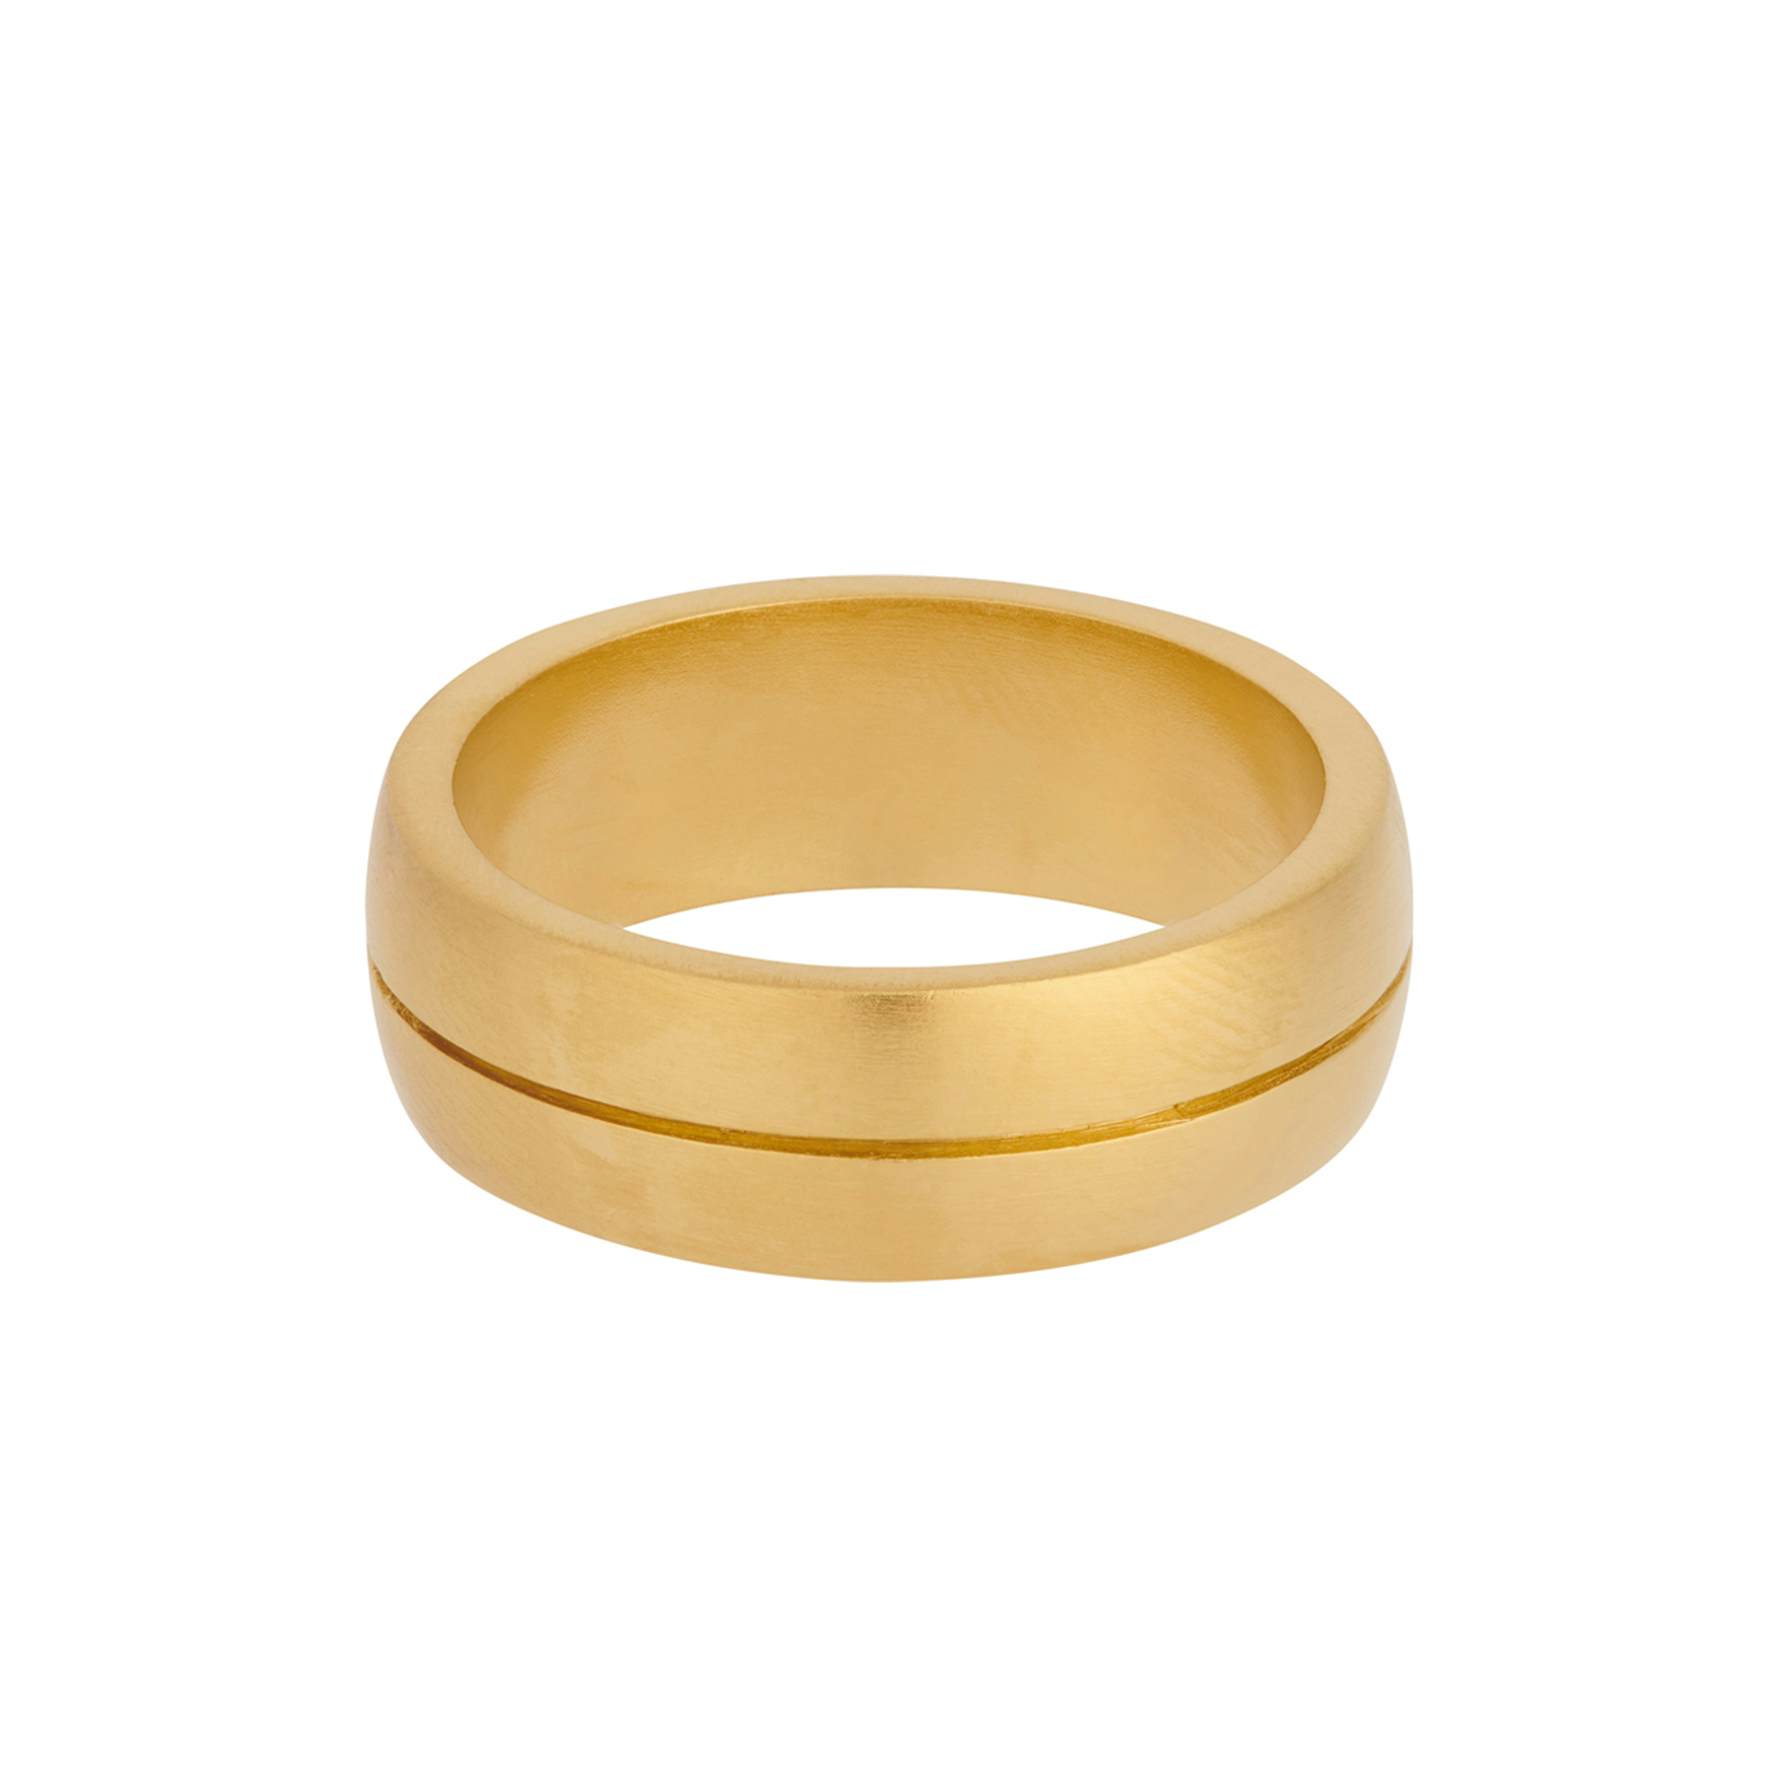 Edge Ring from Pernille Corydon in Goldplated-Silver Sterling 925